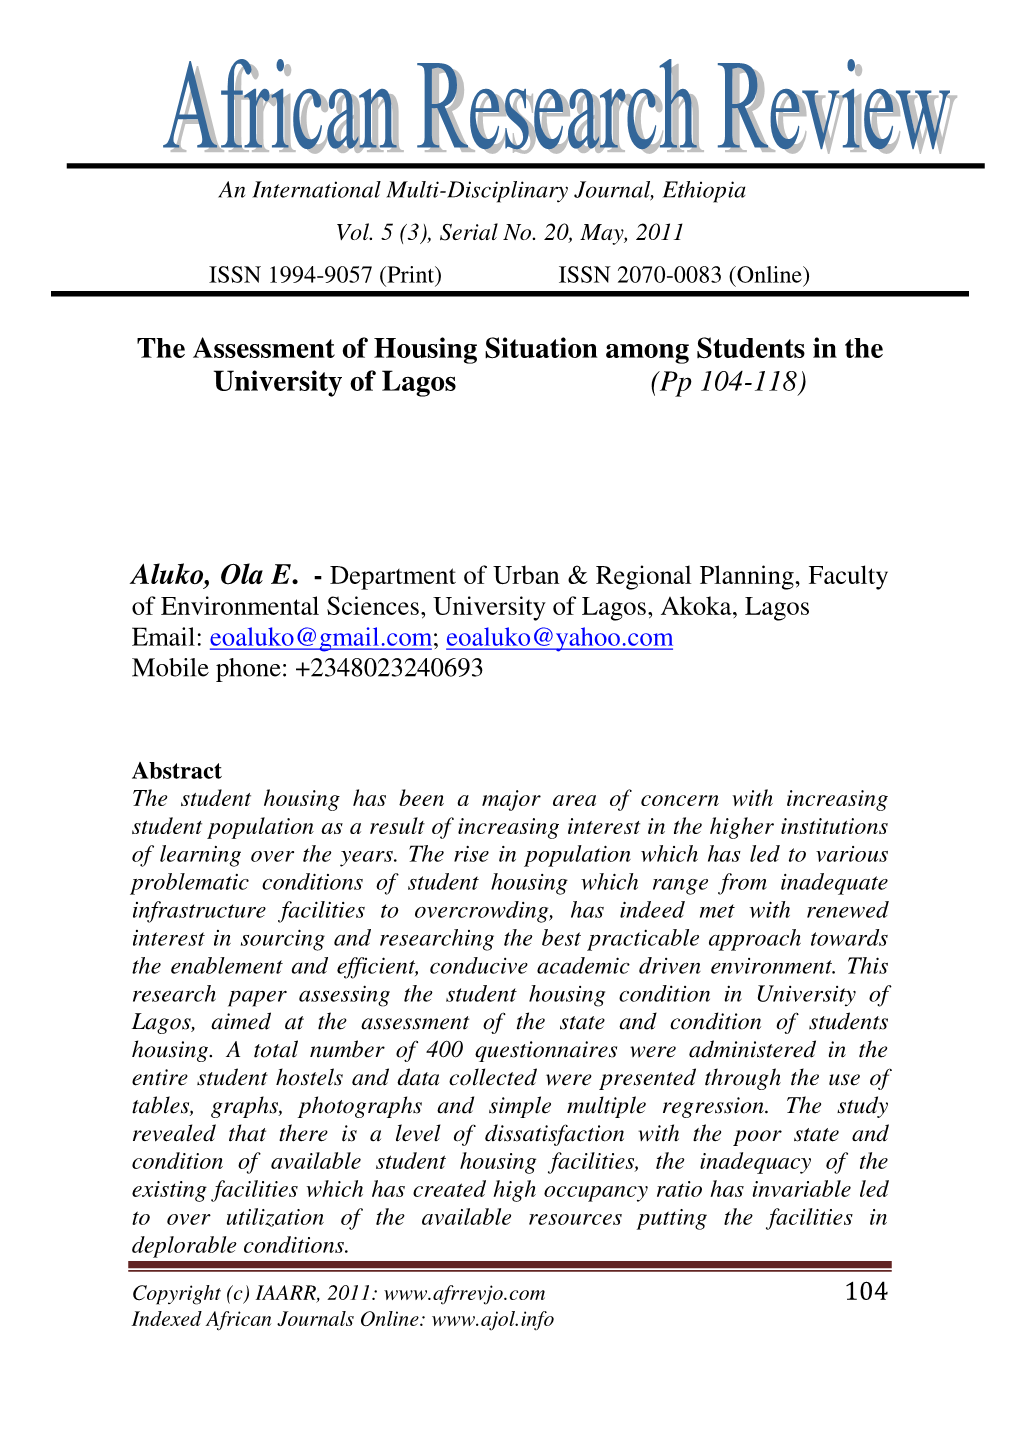 The Assessment of Housing Situation Among Students in the University of Lagos (Pp 104-118)